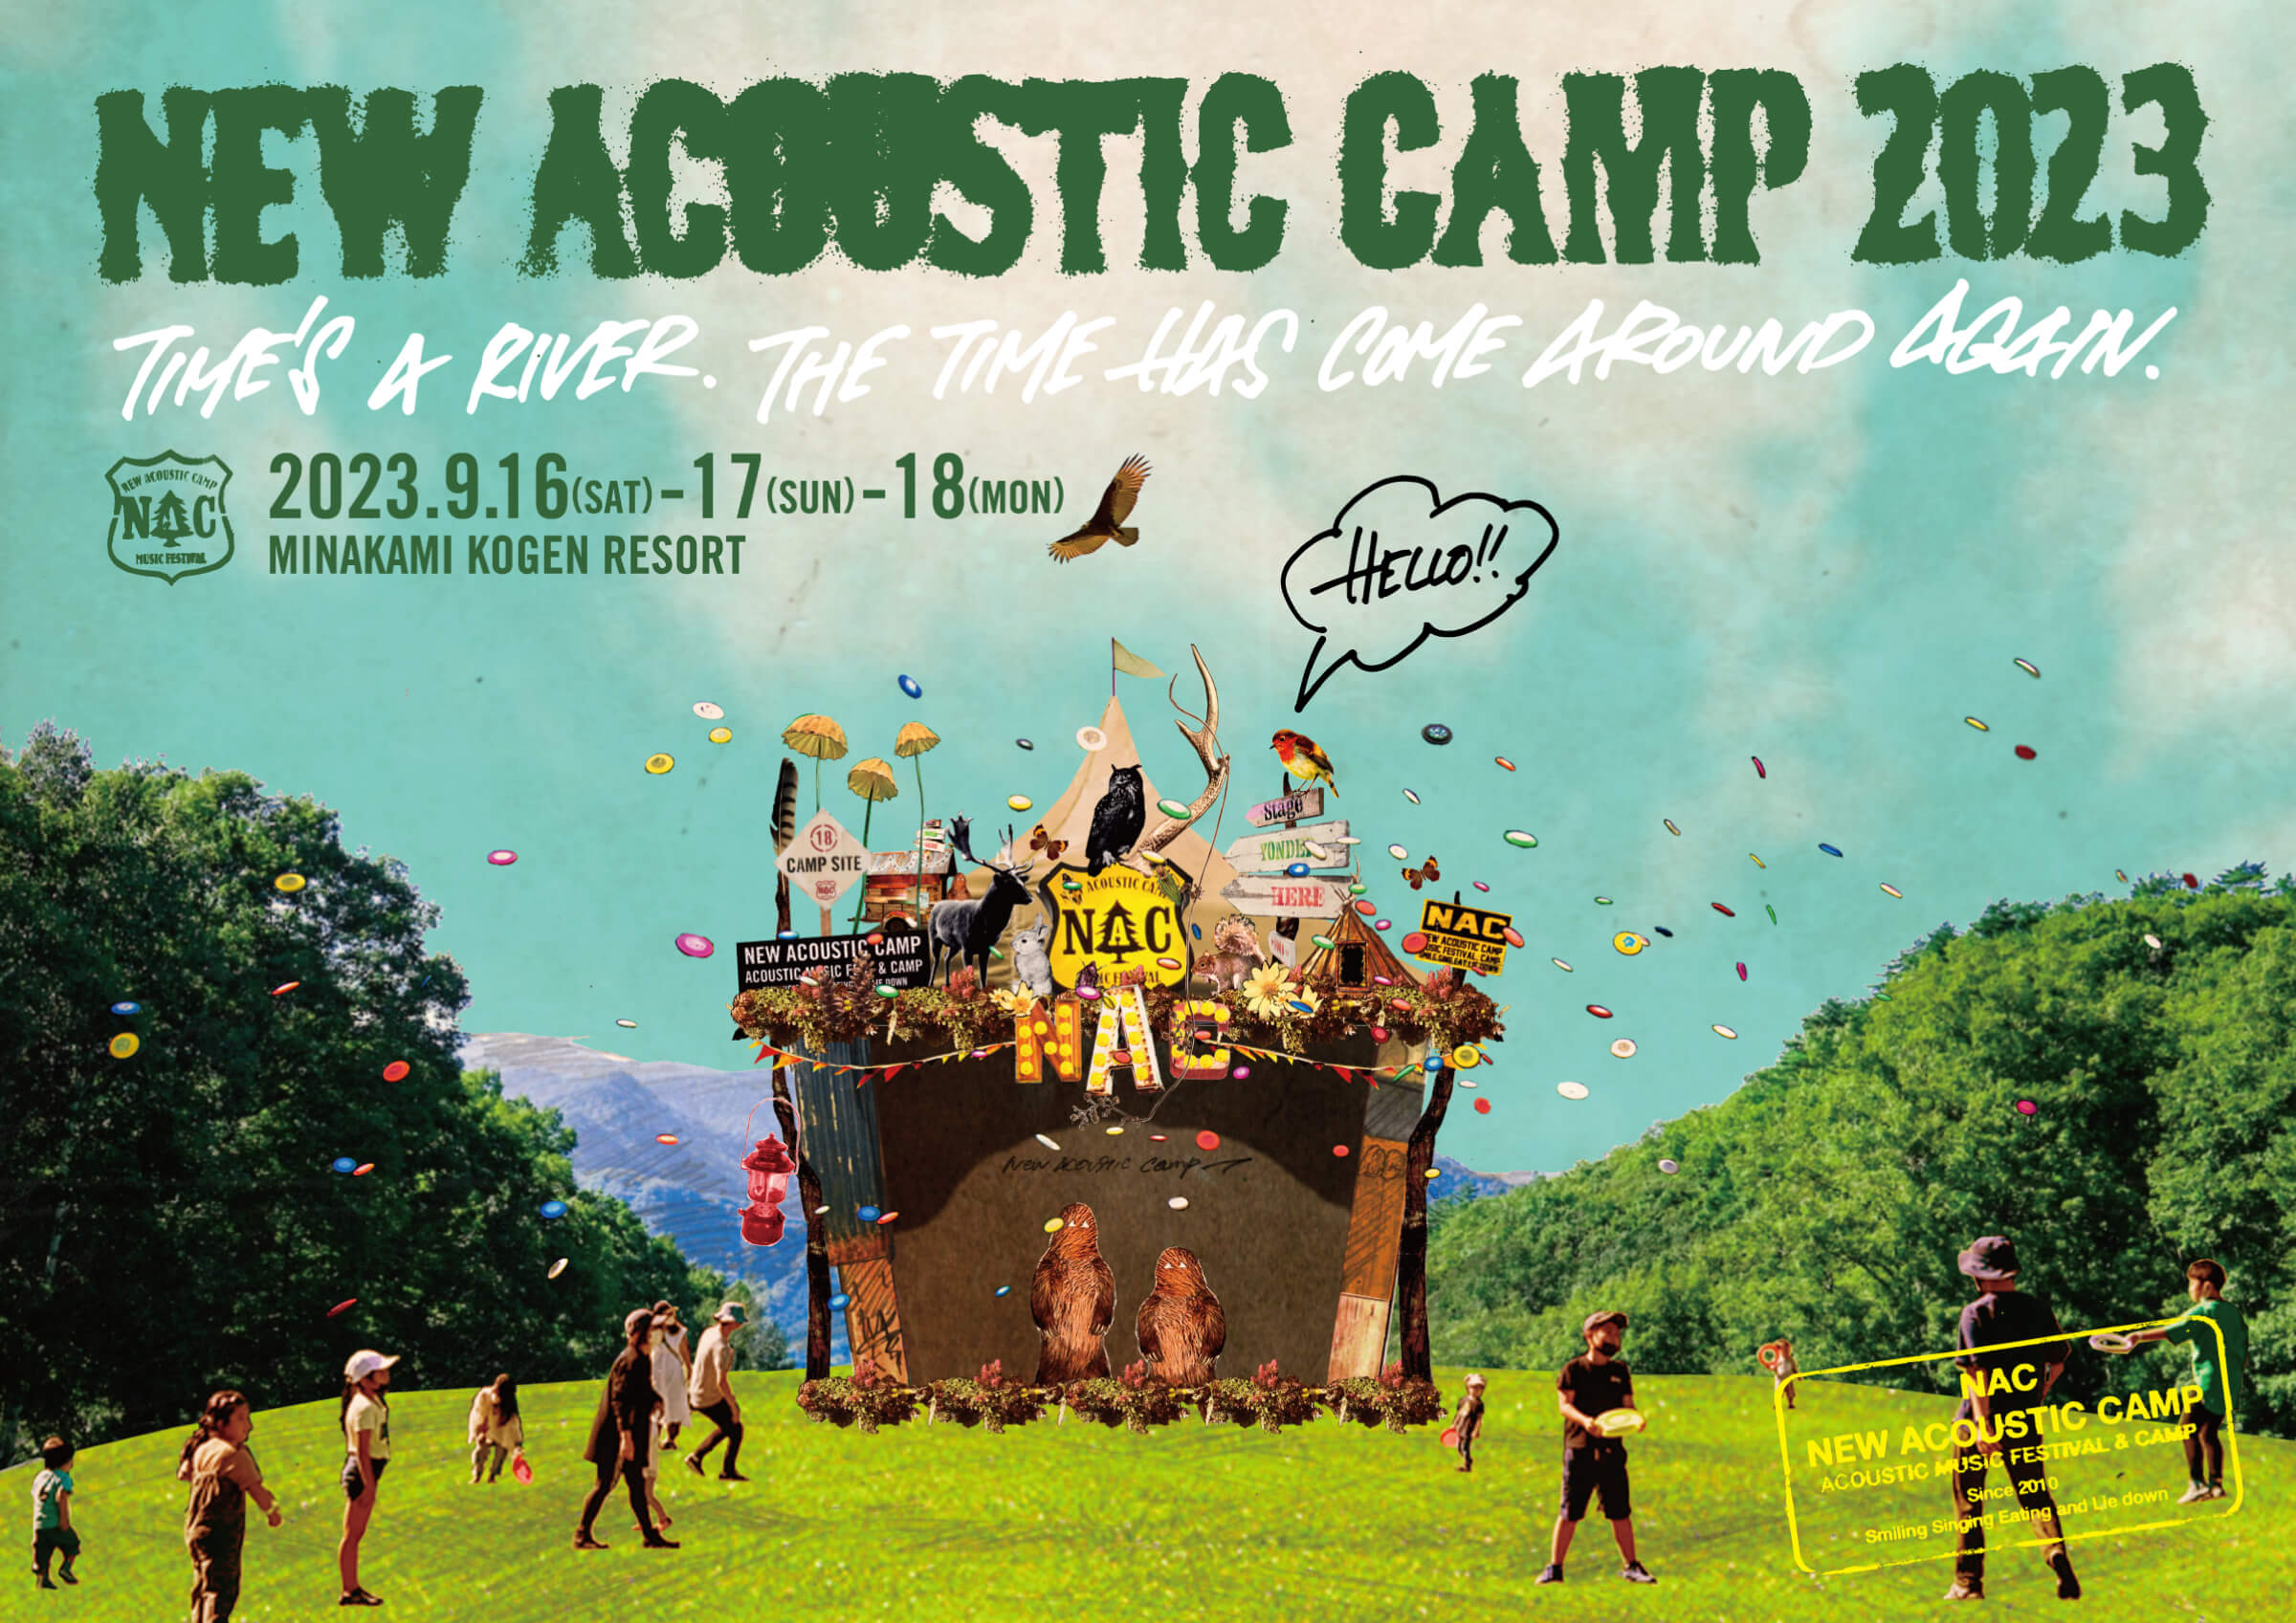 New Acoustic Camp 2022